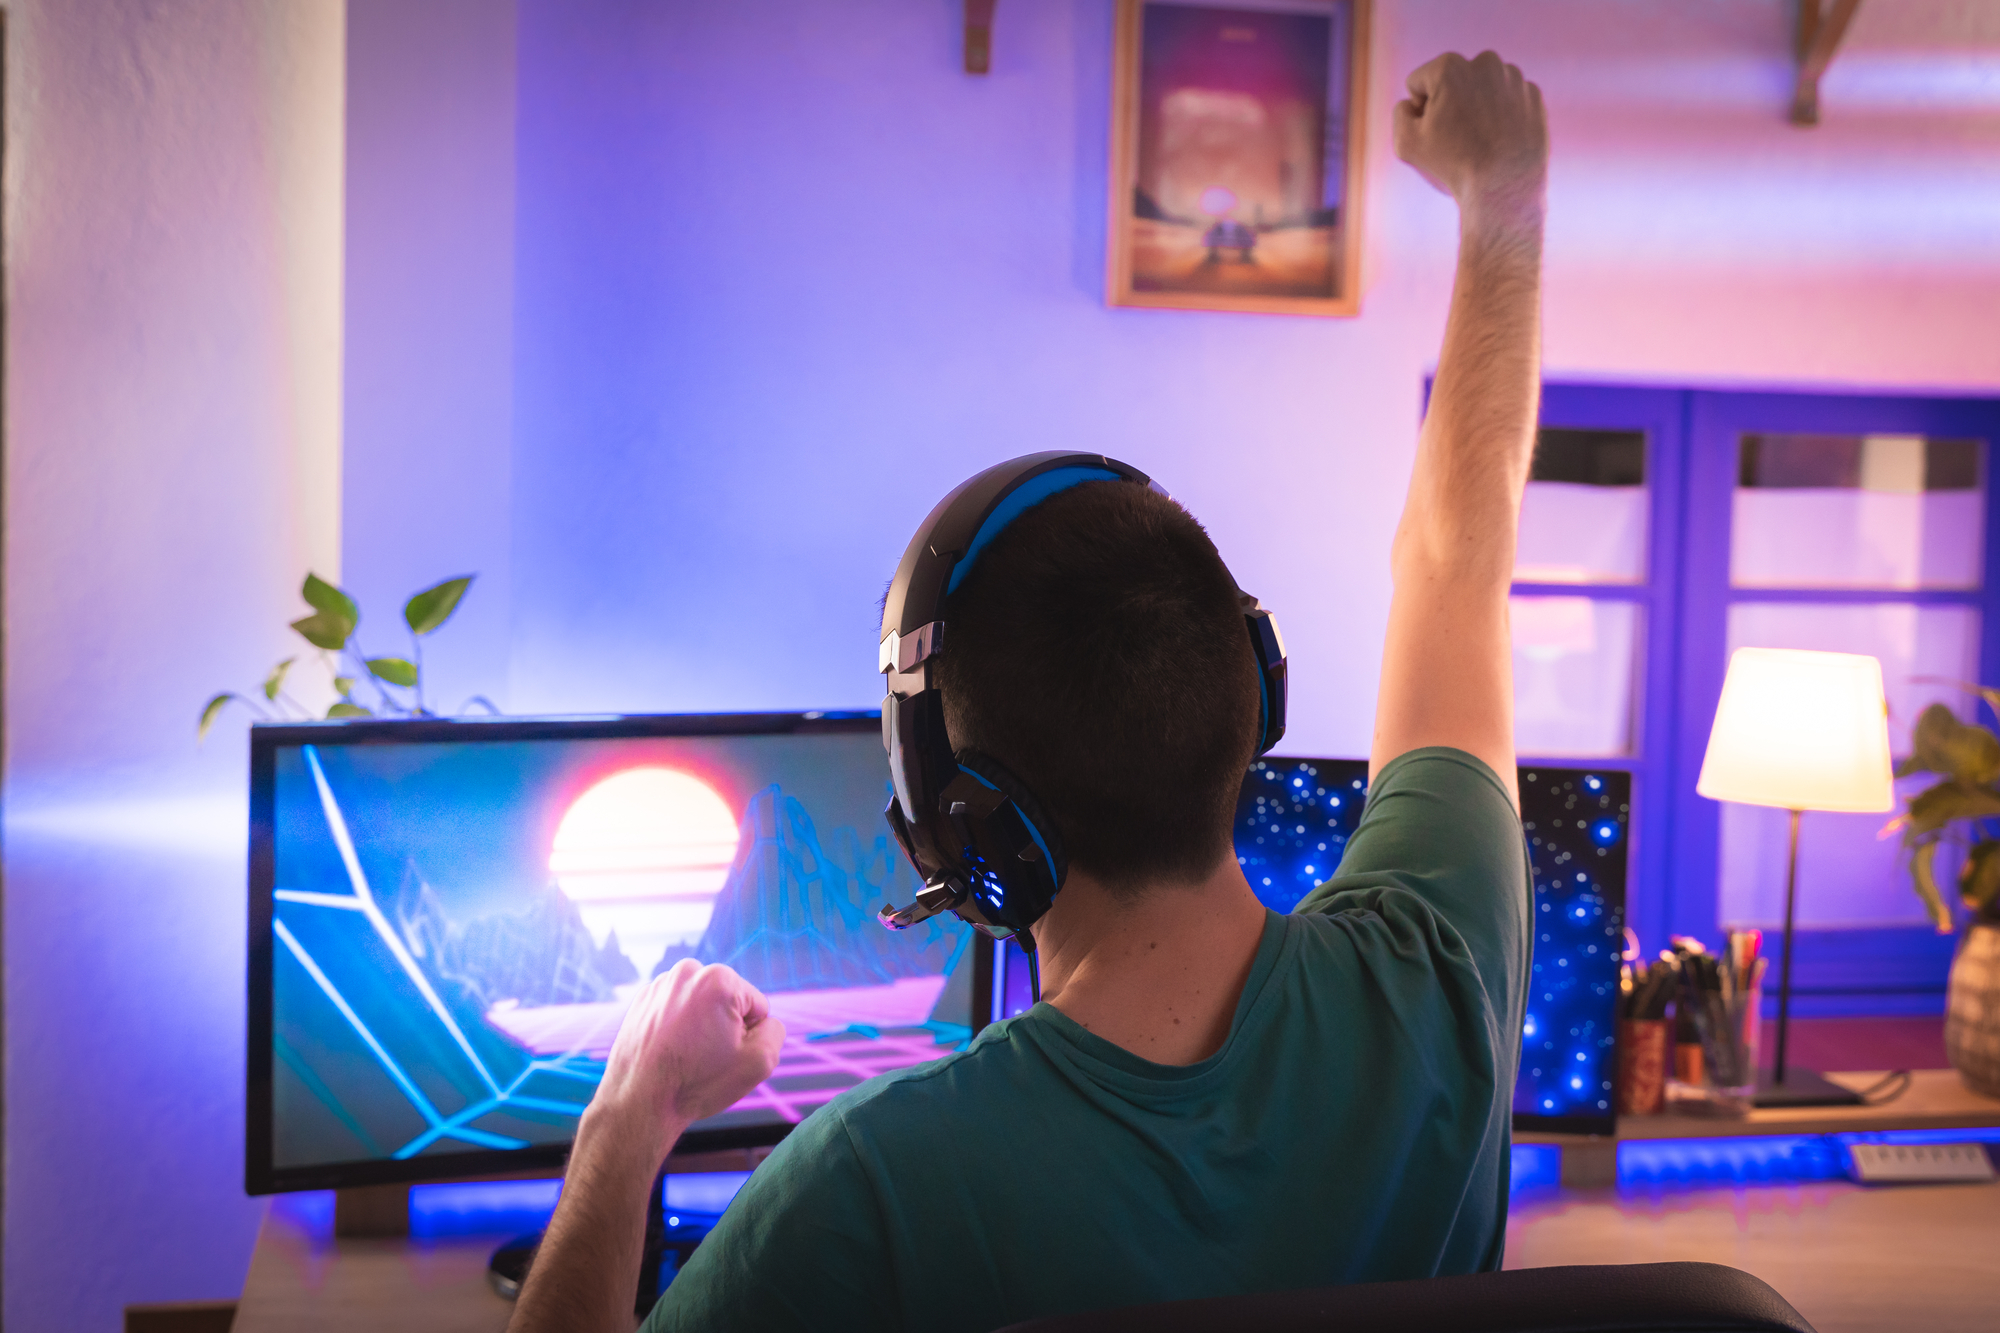 A man is playing a game on his computer while learning how to make money off Steam. One fist held in the air triumphantly